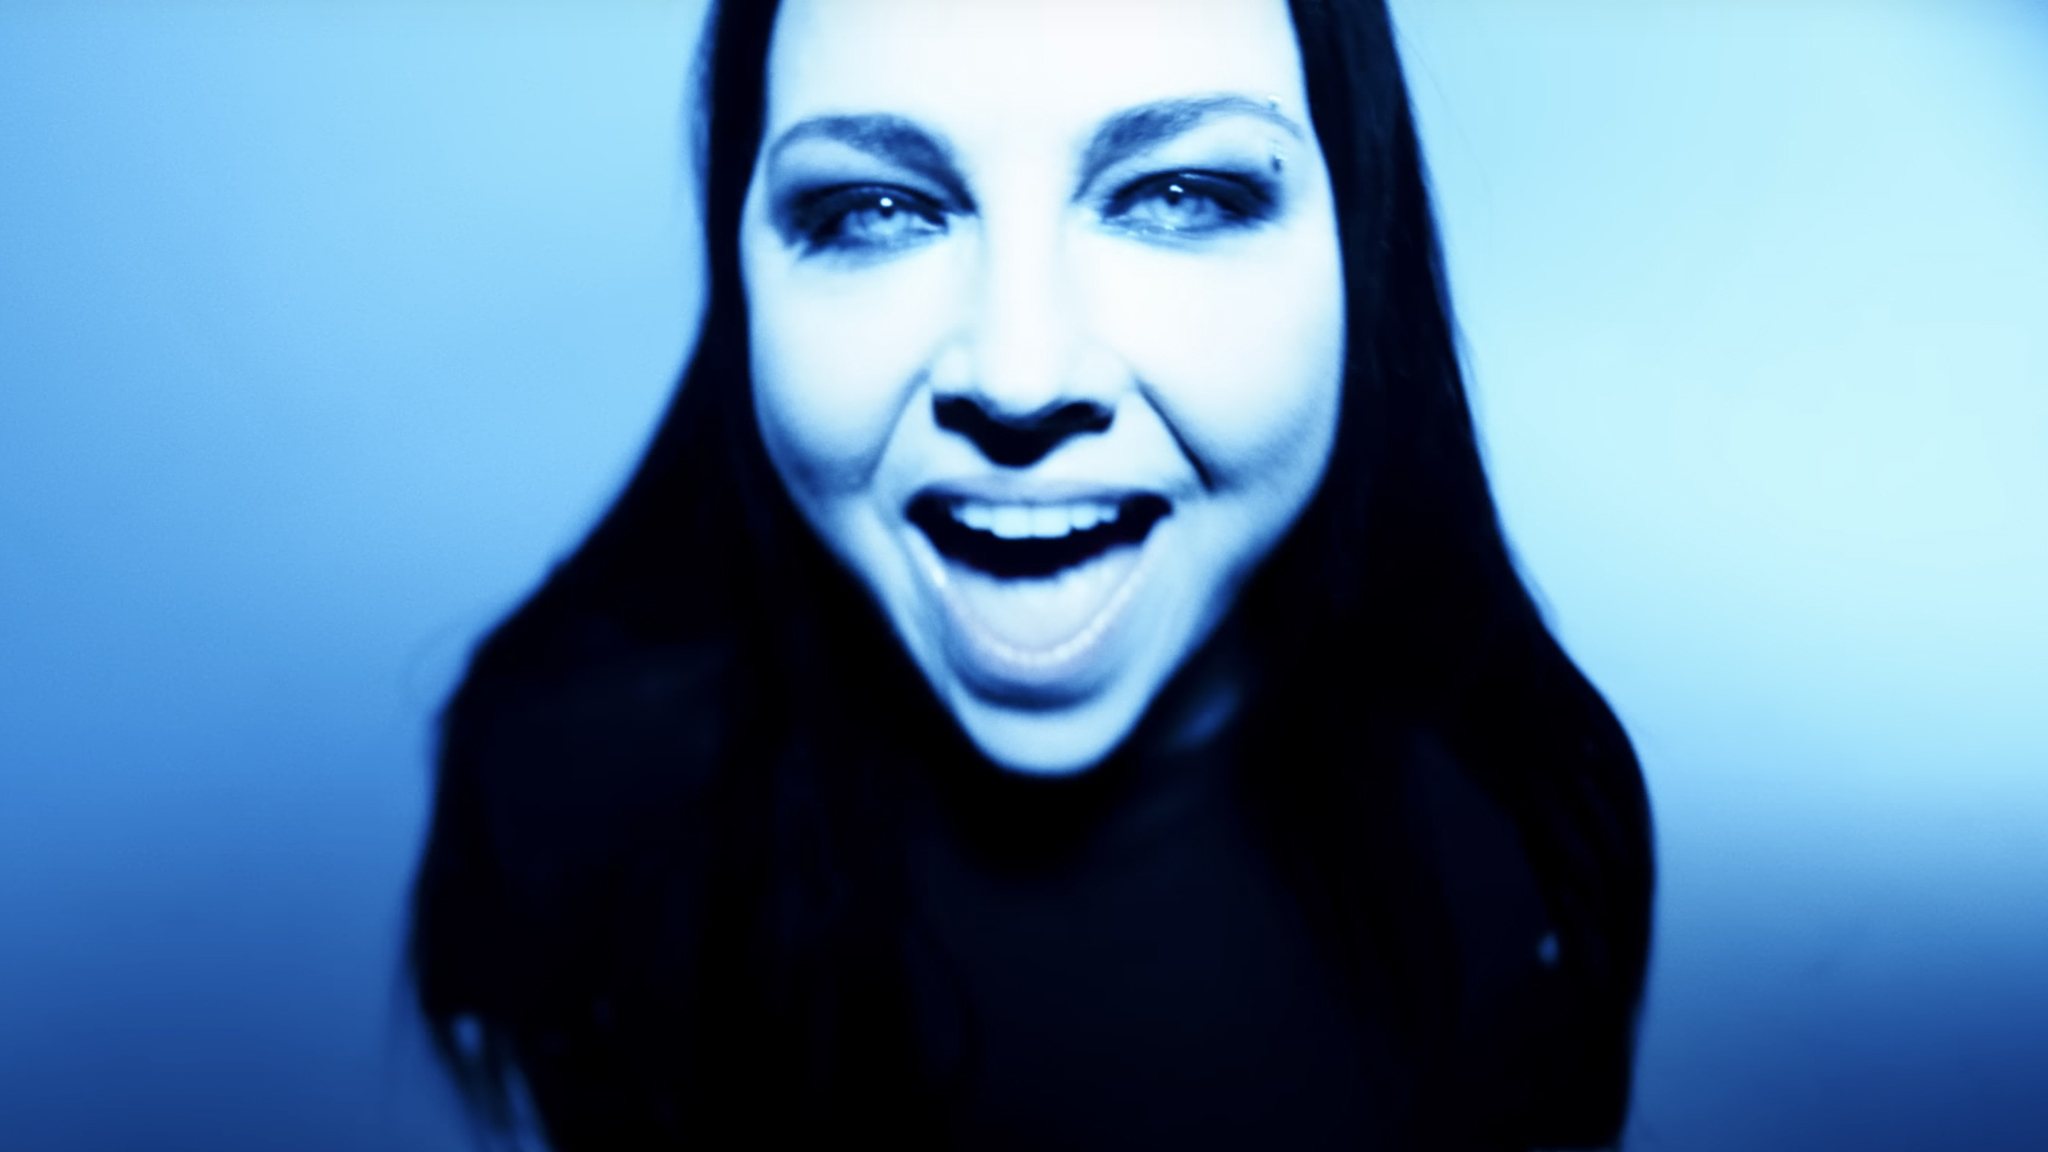 2048x1152
Keywords: yeah right;video;amy lee;the bitter truth